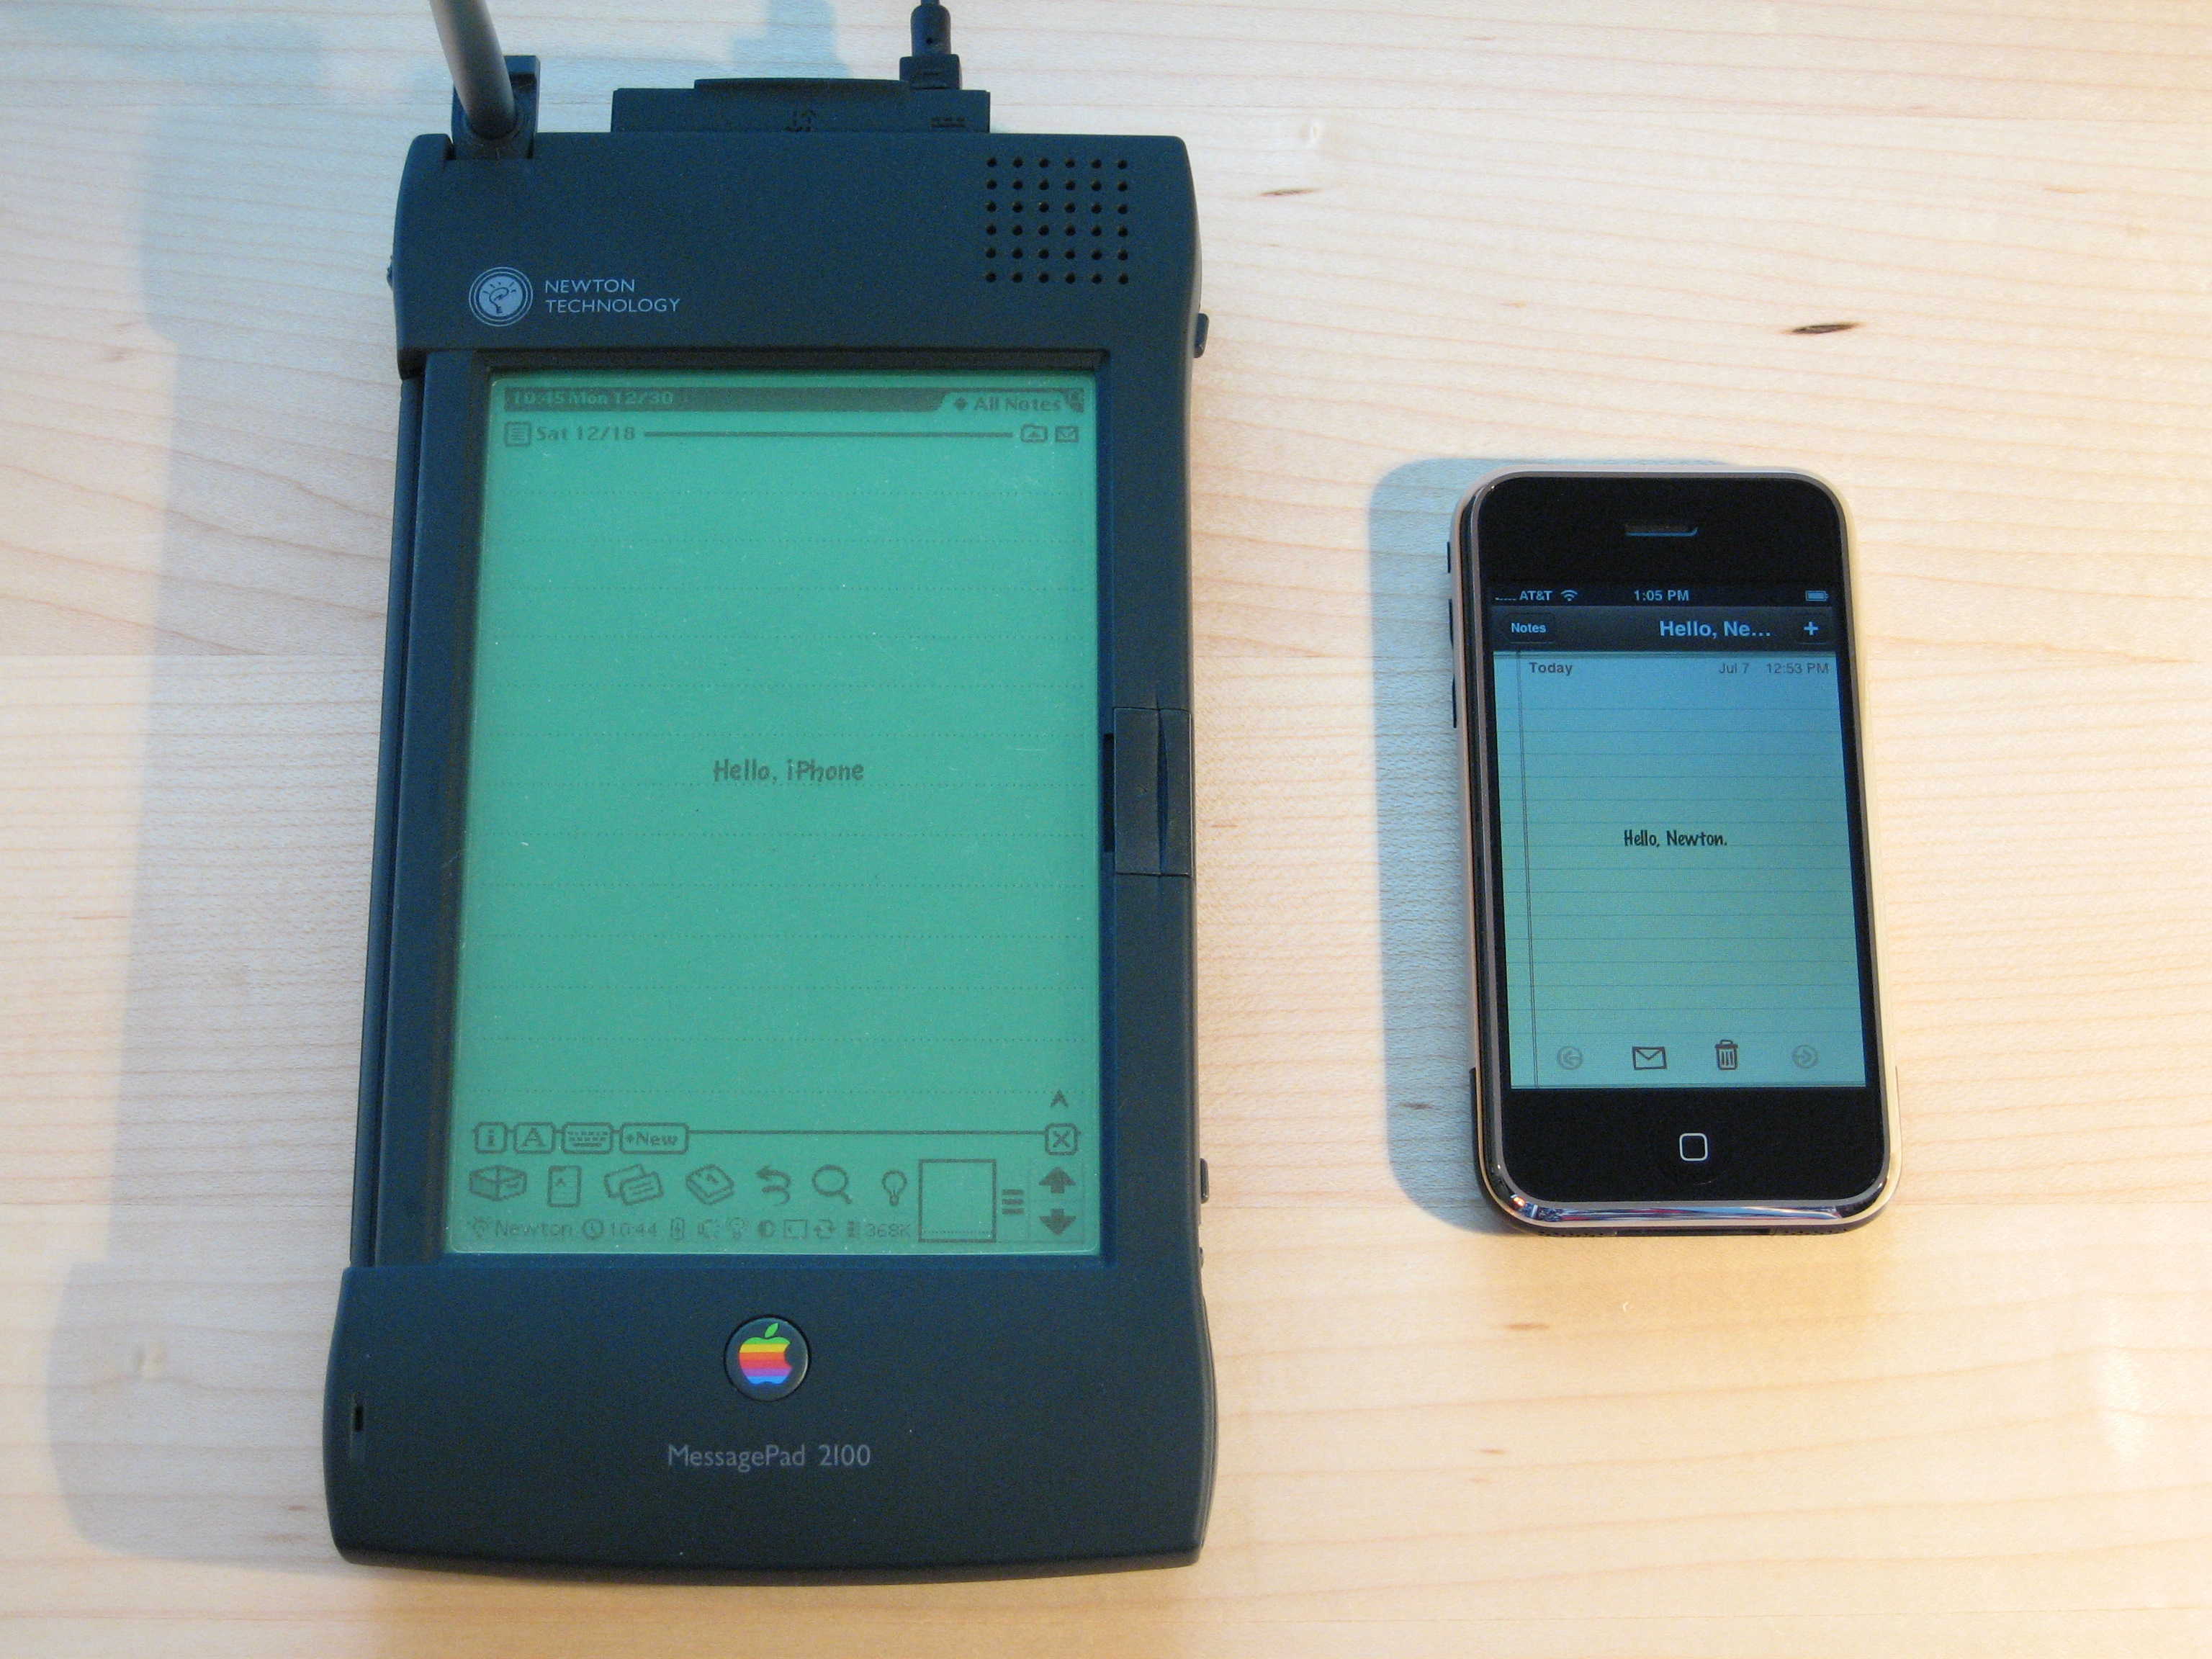 The Newton MessagePad looks gigantic next to an iPhone.